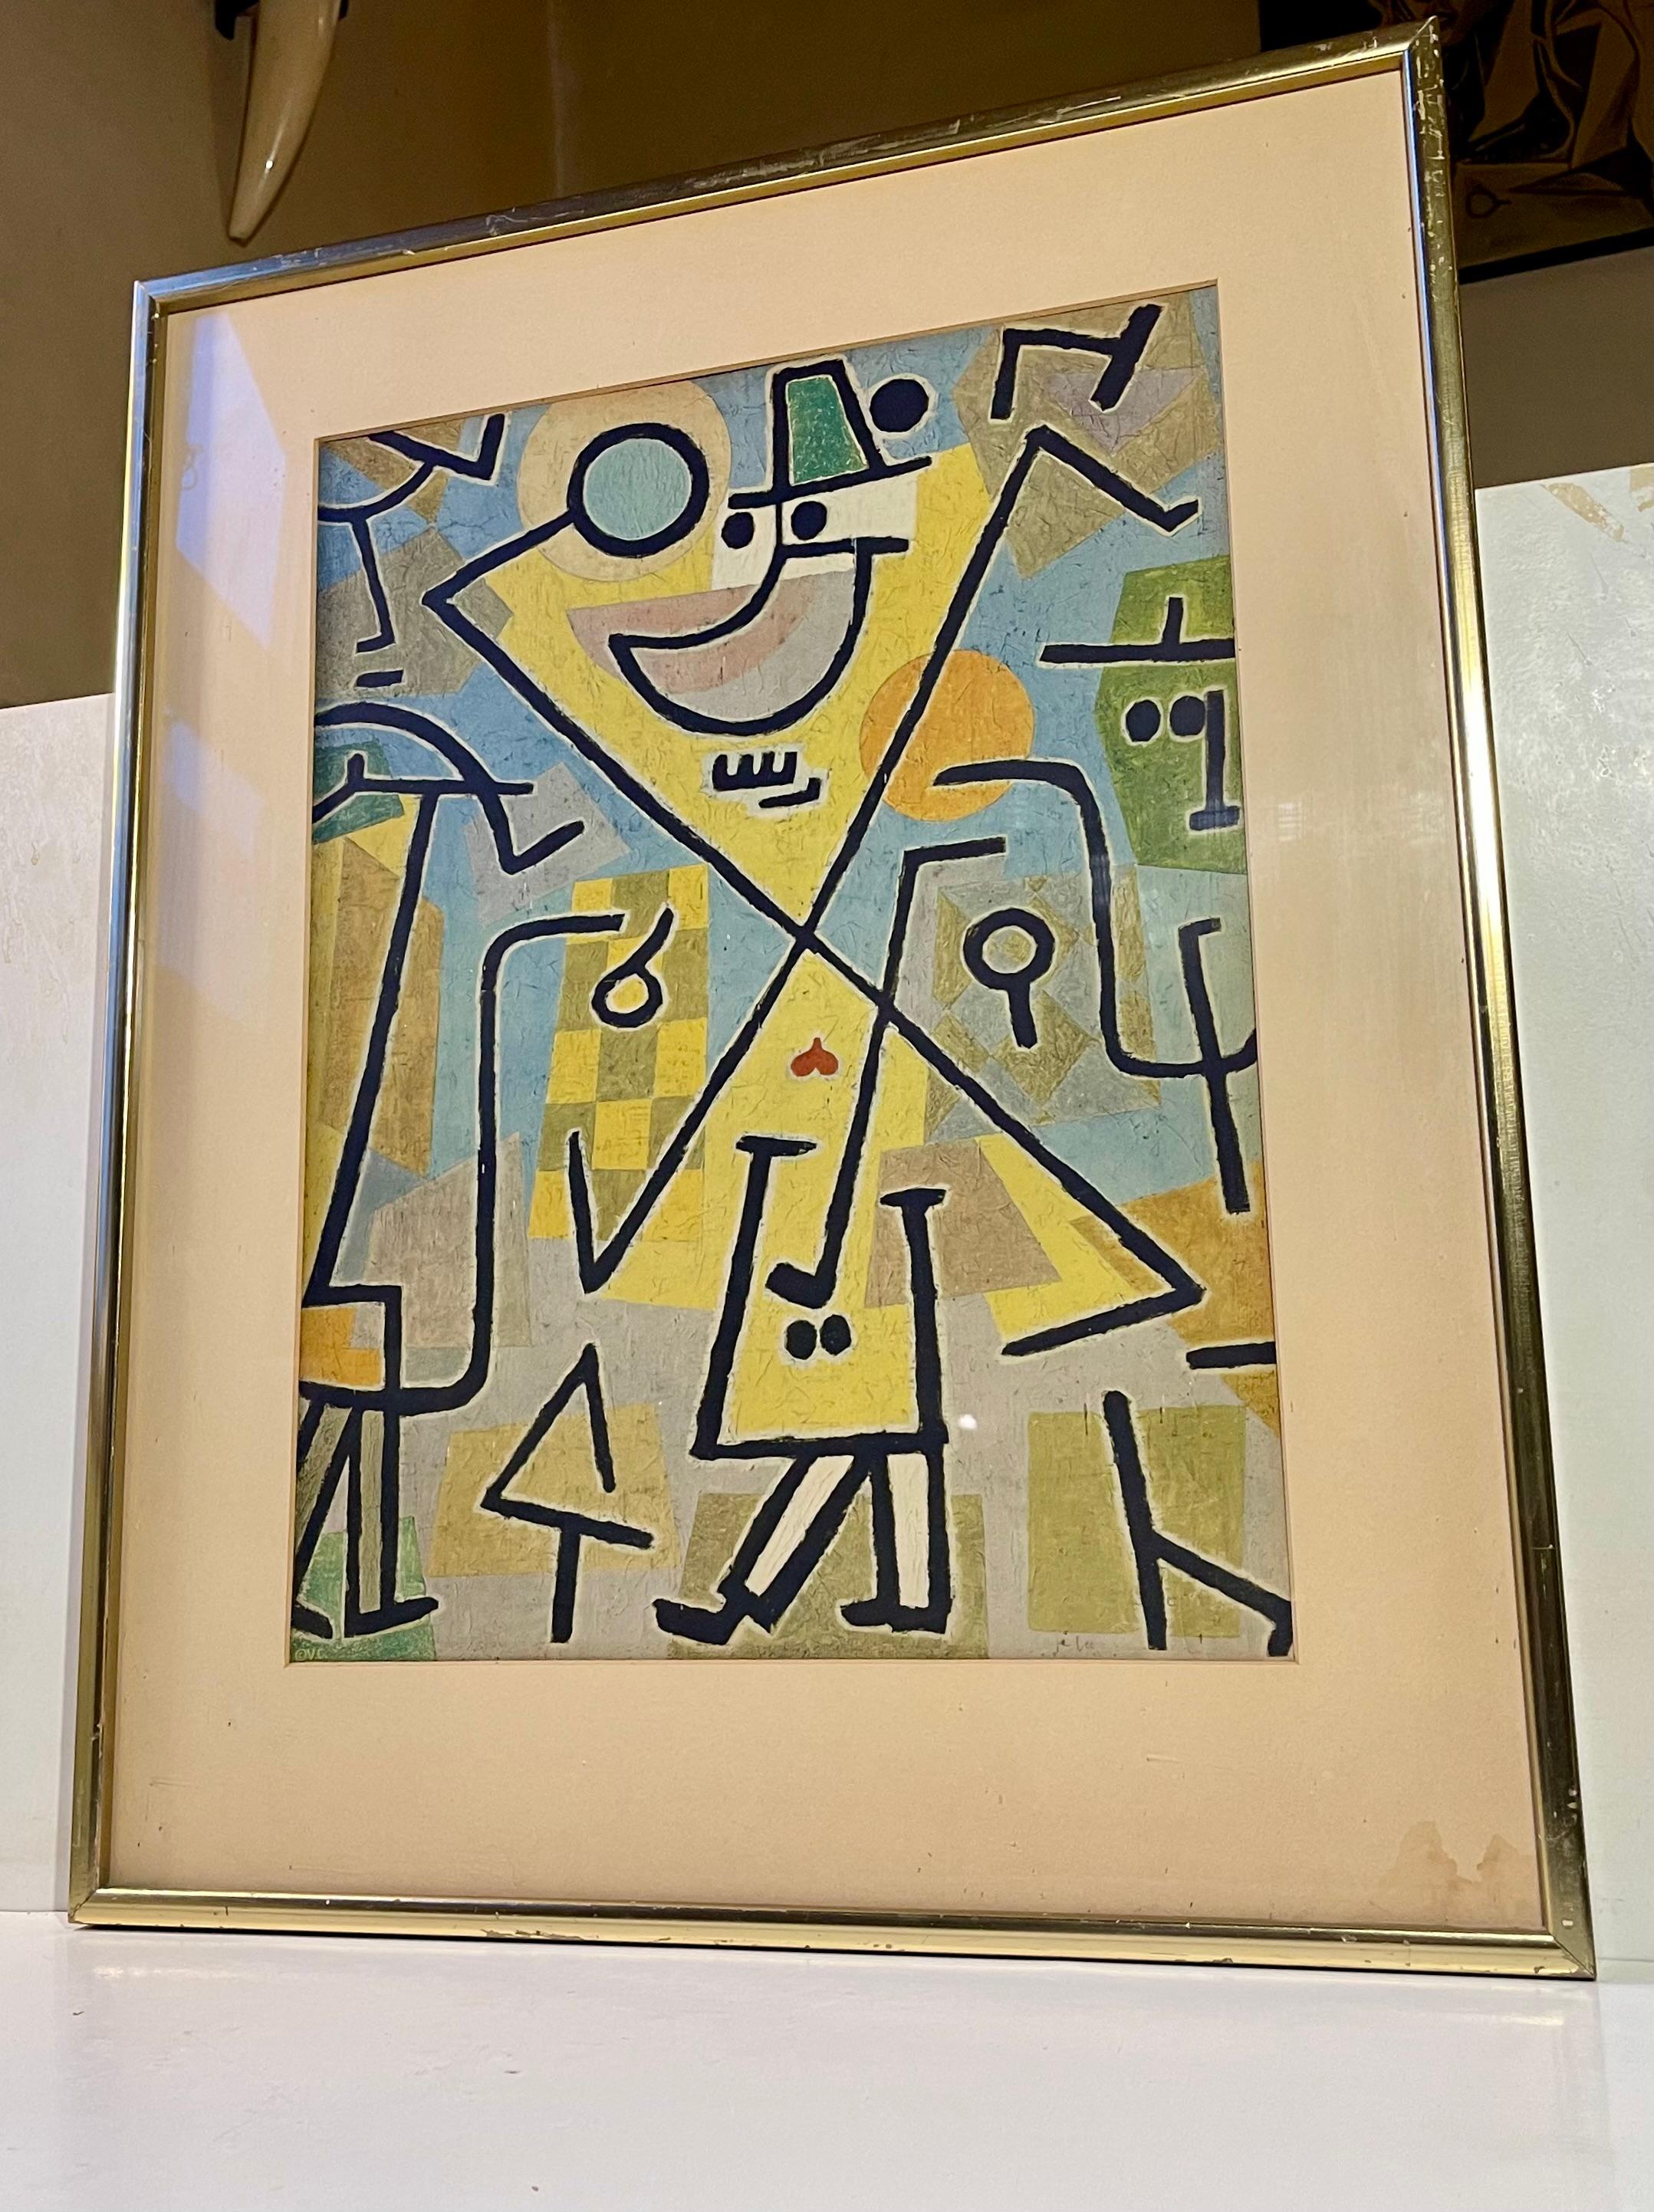 A rare lithographic print of Paul Klee's 'Caprice in February' from 1938. A vintage print from un-identified printer: V. E. or V. C. - markings present to the left side bottom corner. Plate signed lightly in the bottom right: Klee, possibly in